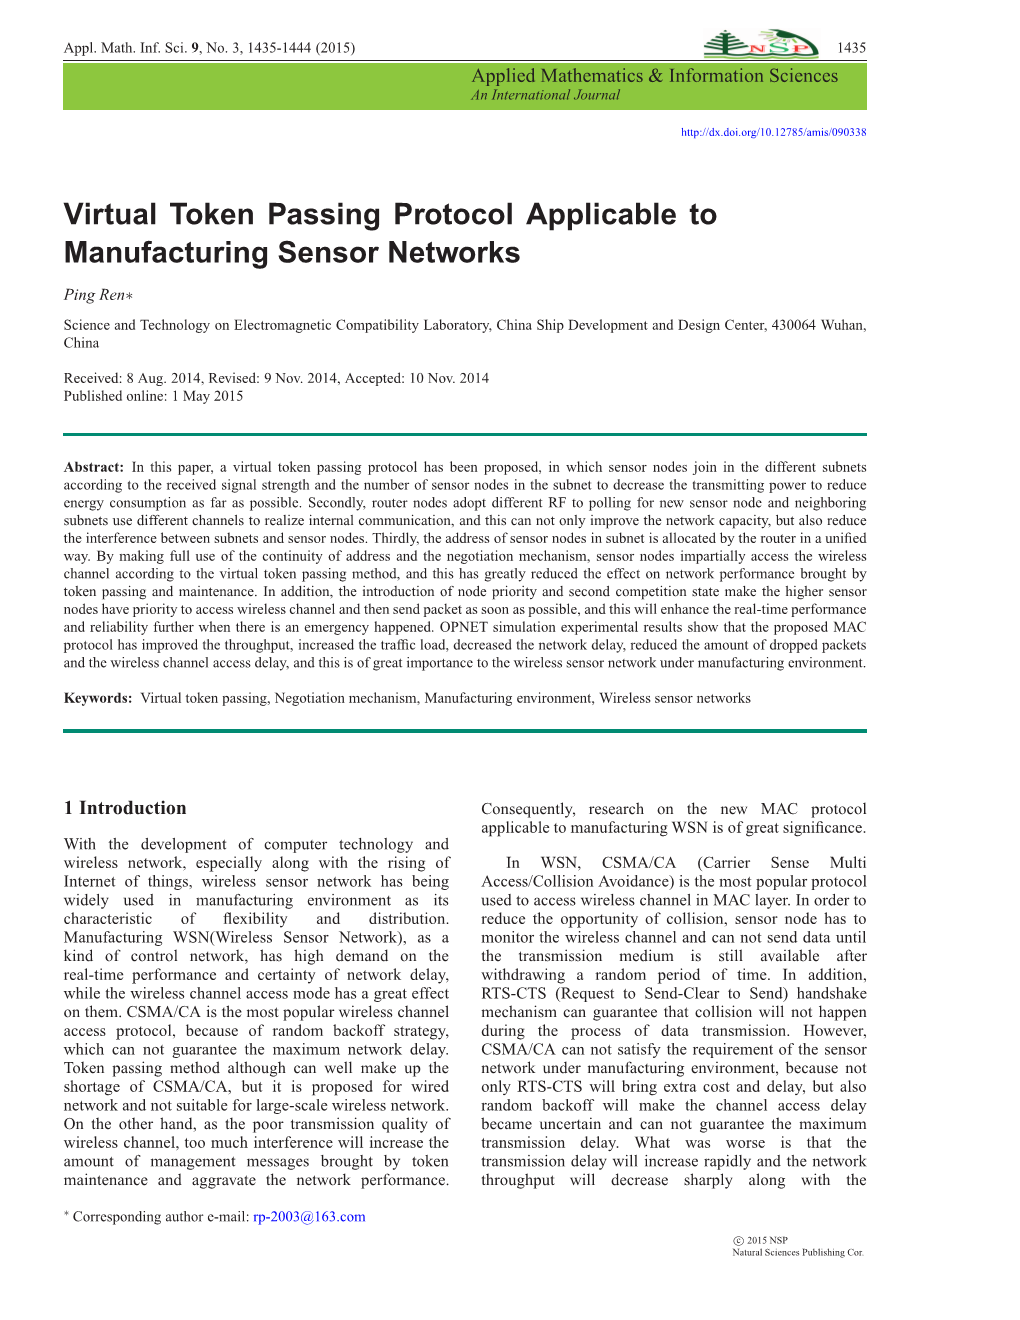 Virtual Token Passing Protocol Applicable to Manufacturing Sensor Networks